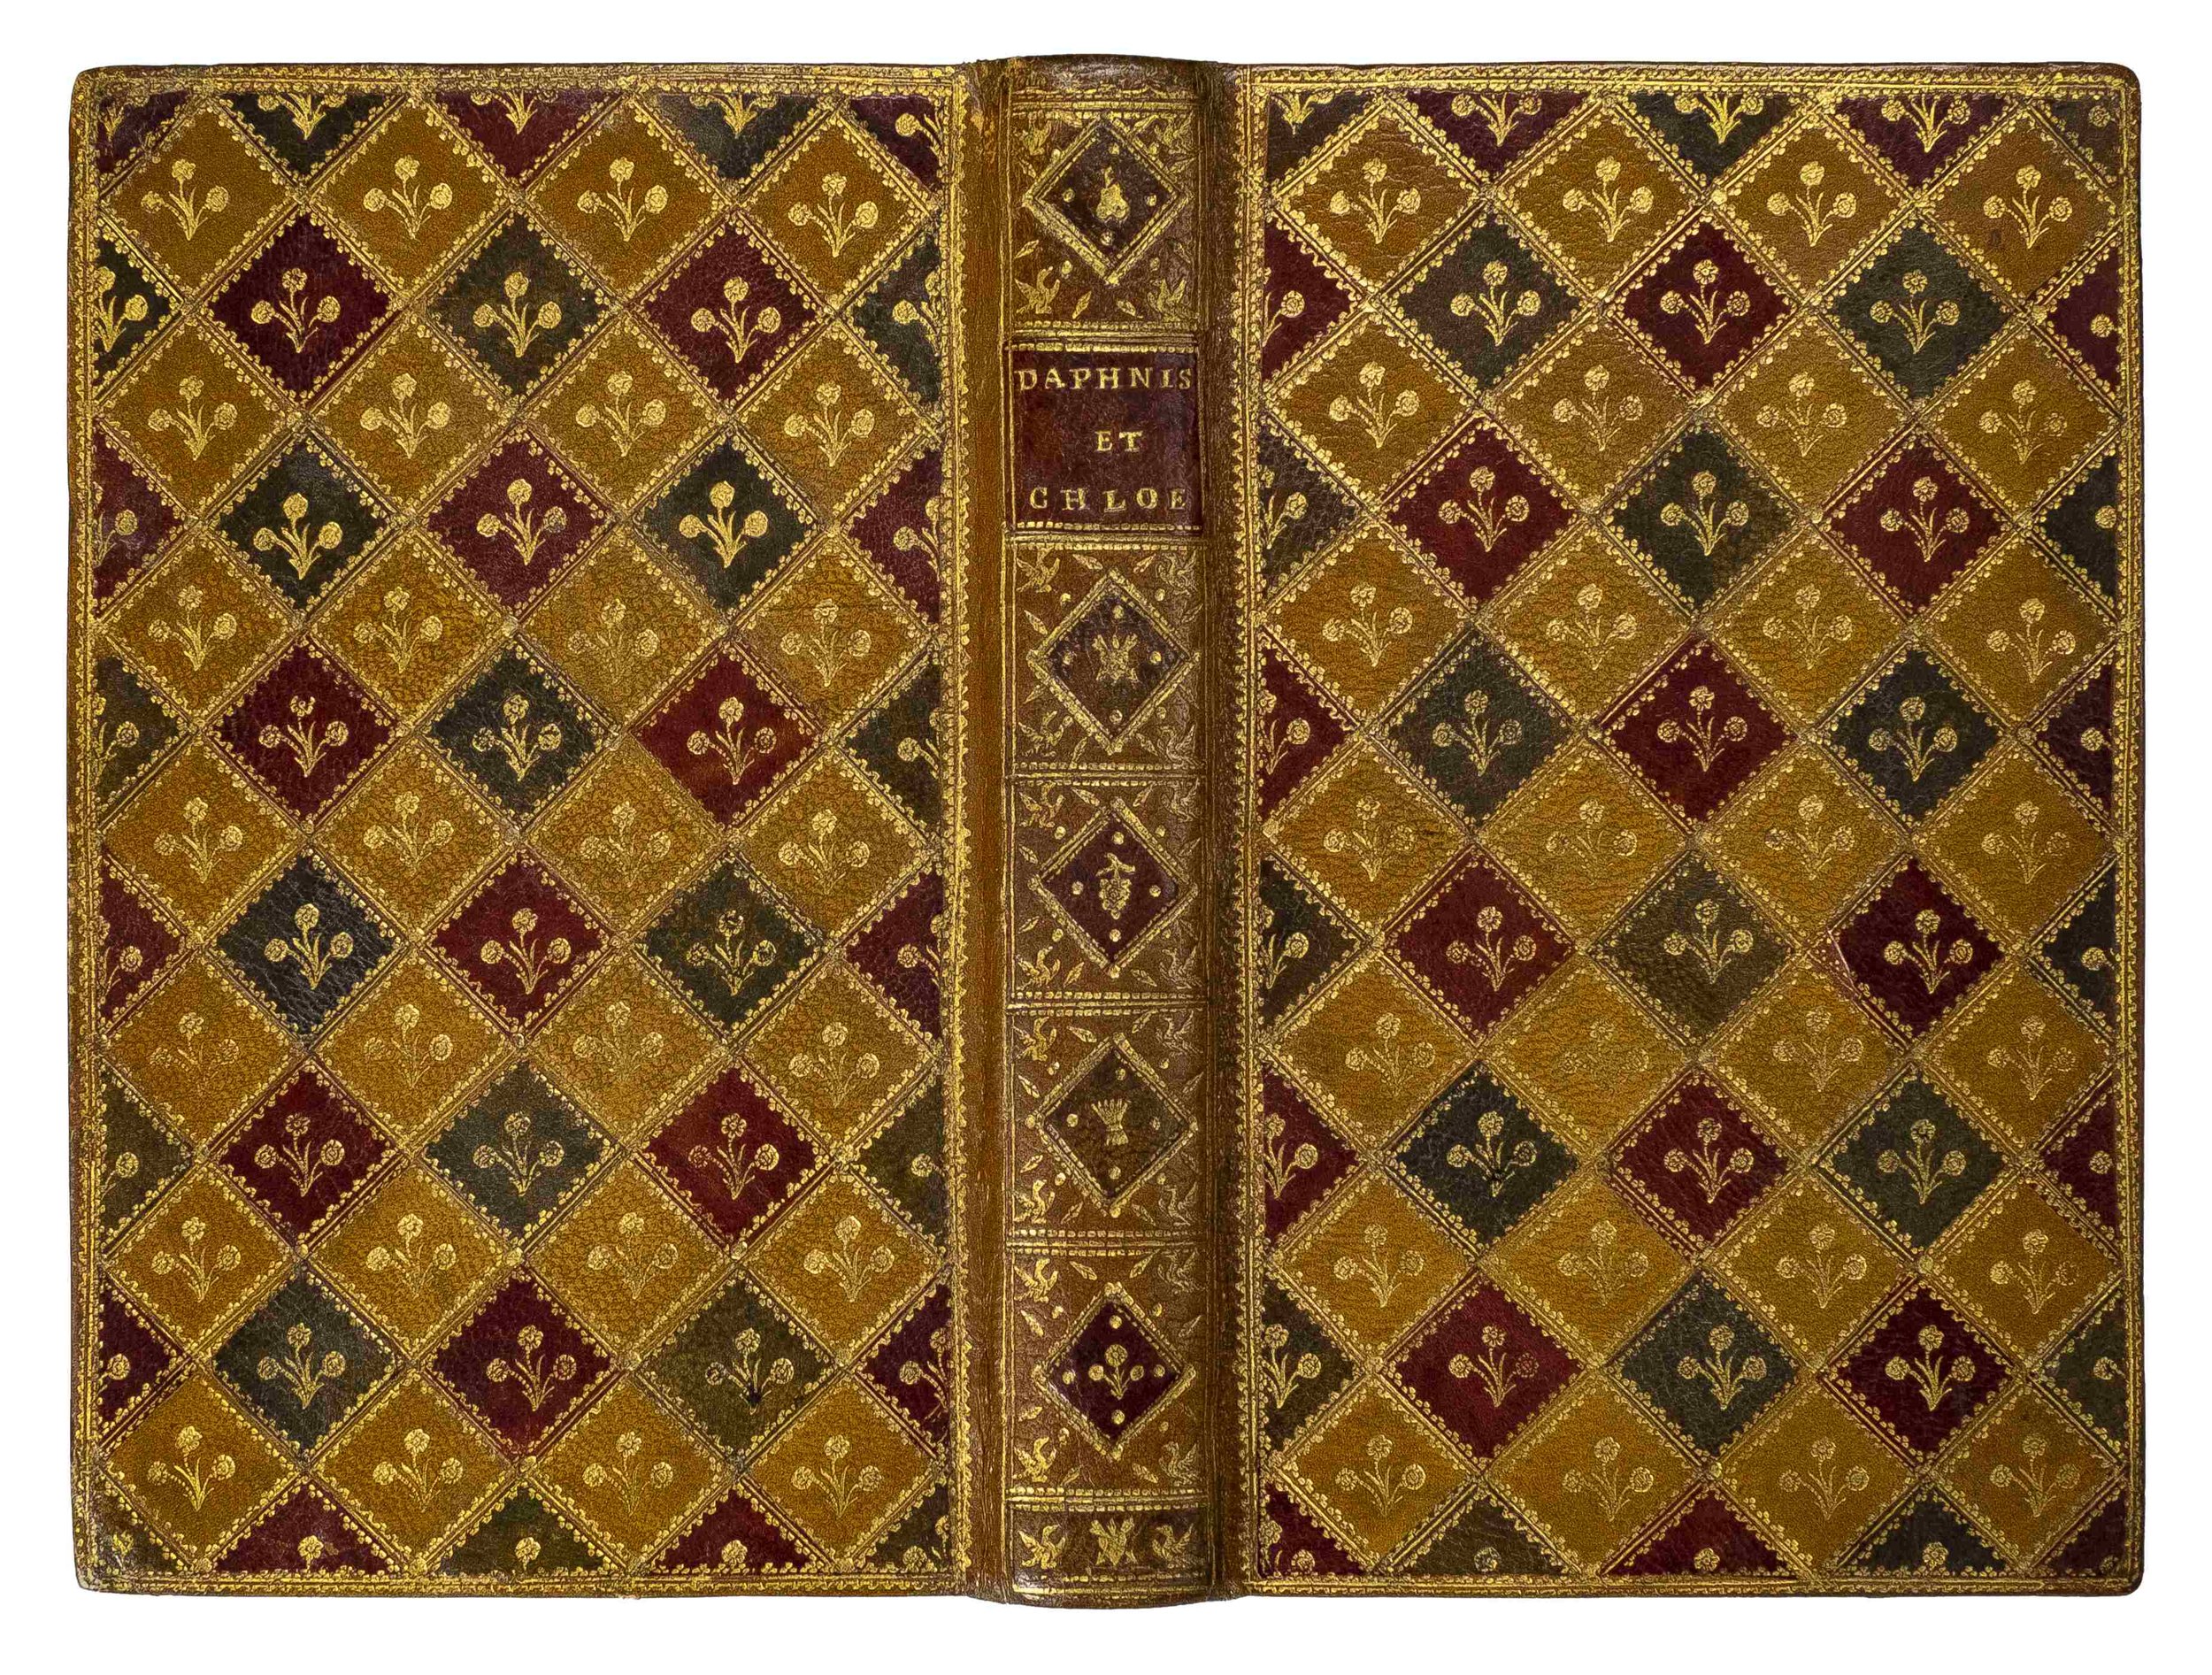 068-padeloup-a-repetition-Inlaid-Binding-morocco-mosaic-reliure-maroquin-18th-century.jpg